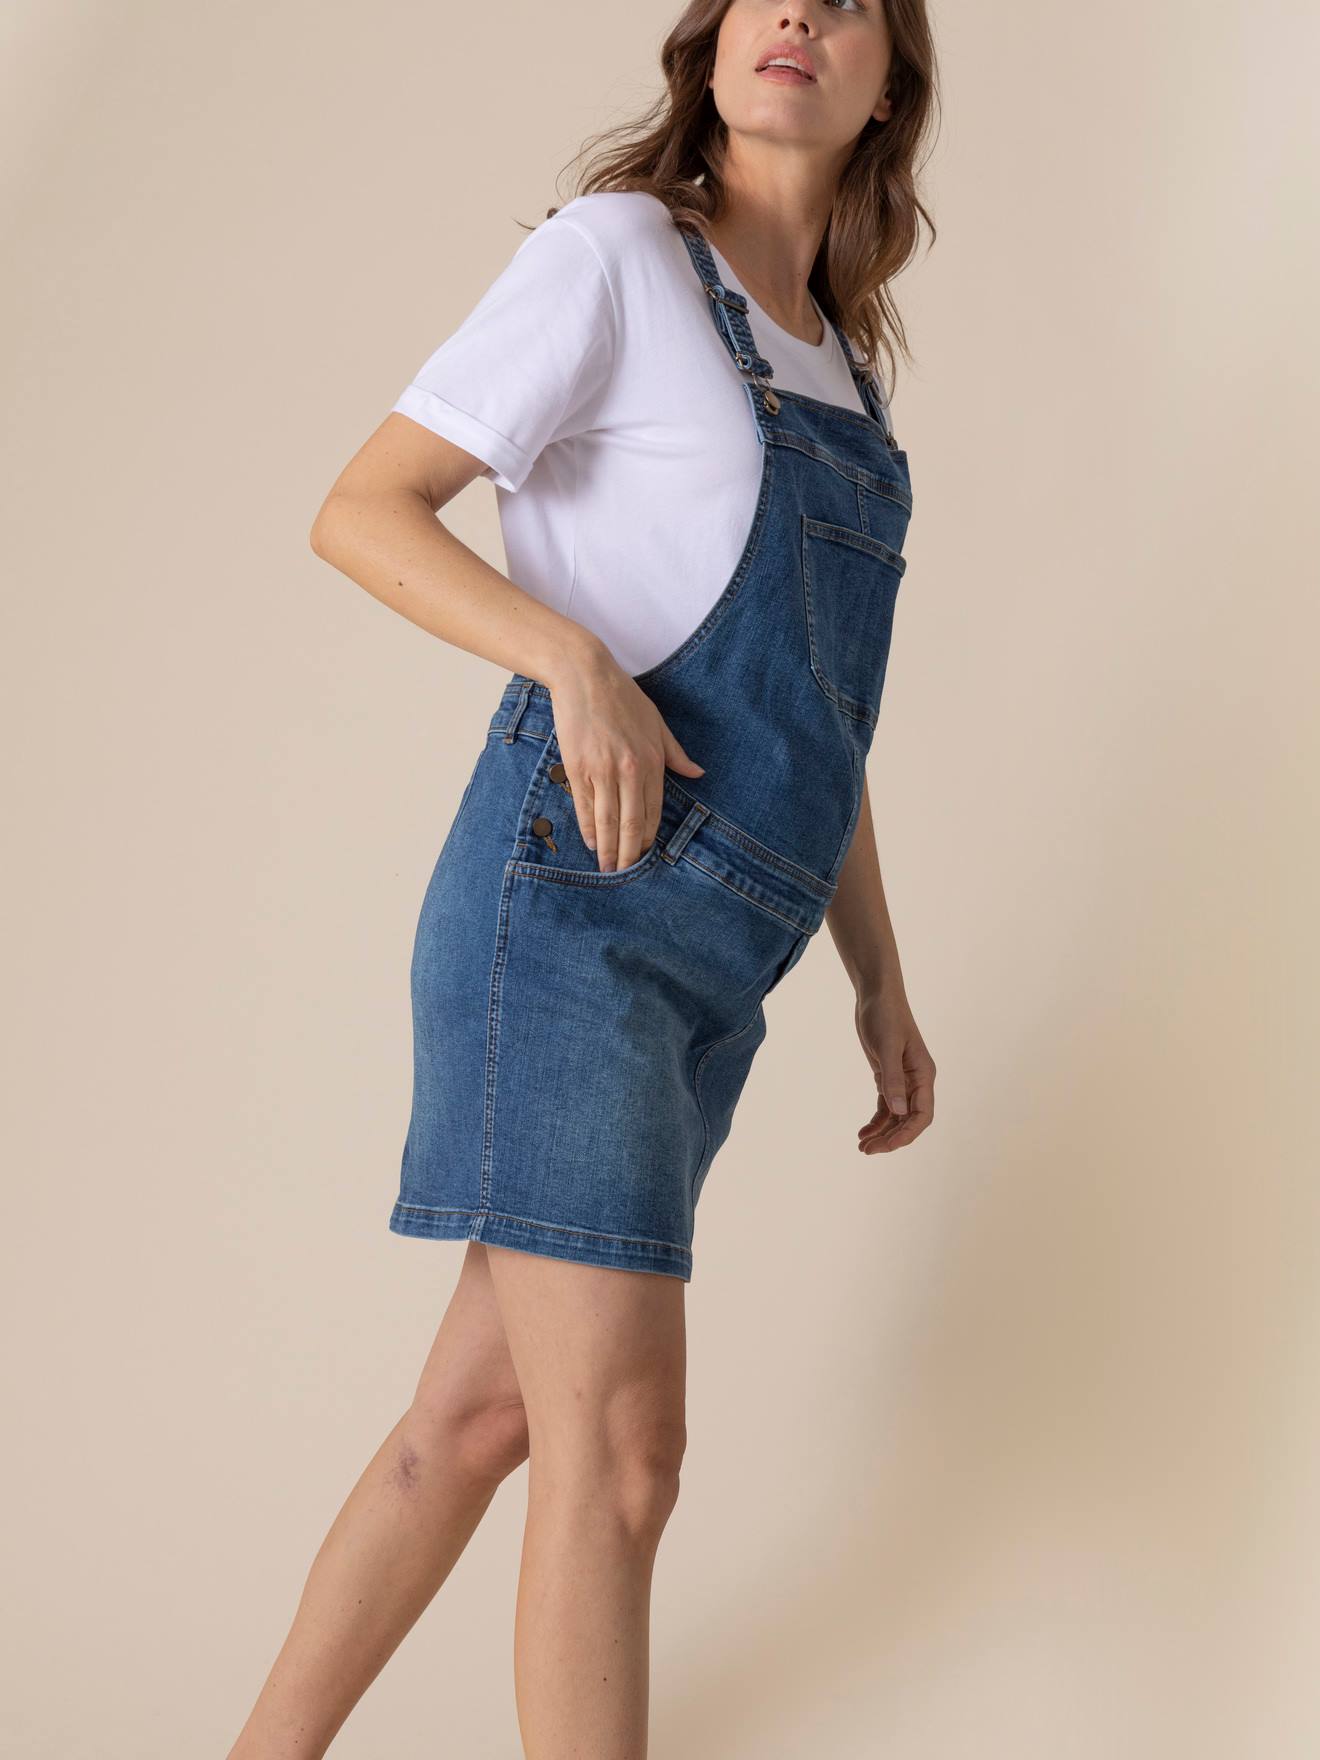 Dungarees for Women - Upto 50% to 80% OFF on Women Dungarees / Dangri Suit  Online at Best Prices In India | Flipkart.com